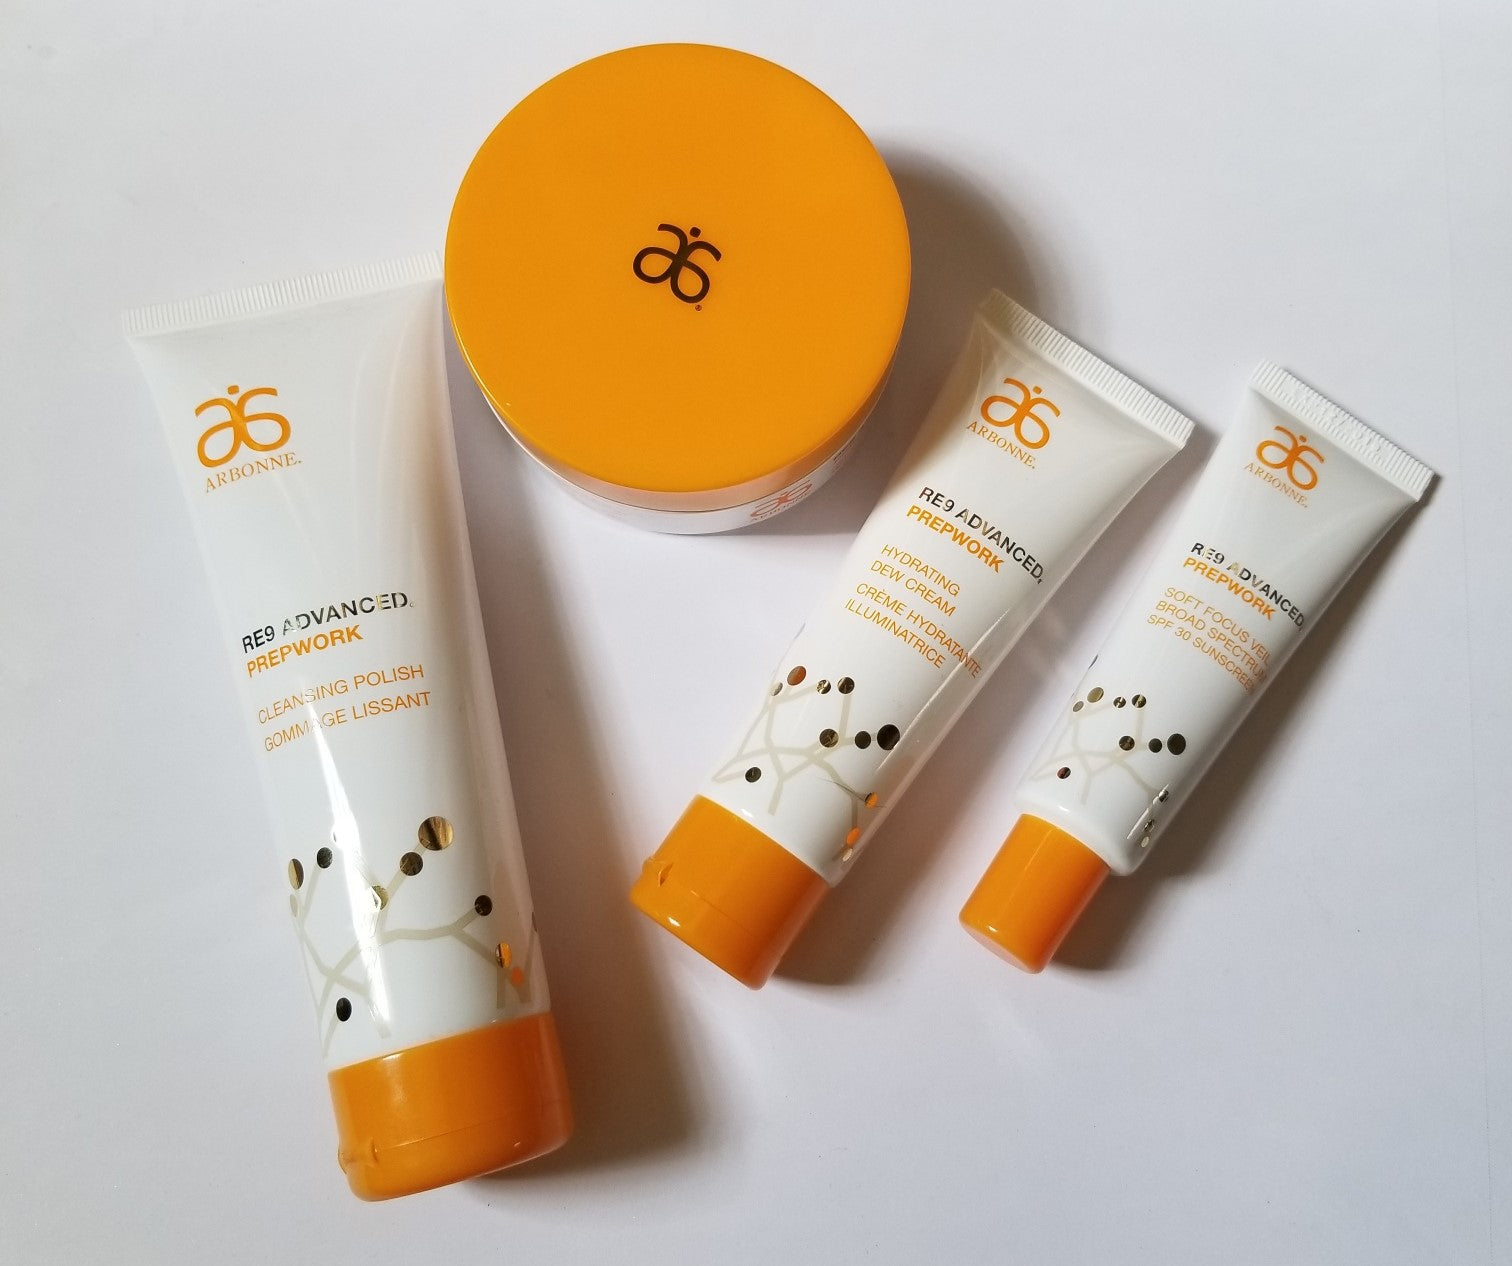 Review, Ingredients, Photos, Swatches, Makeup, Skincare Trend 2018, 2019, 2020: Get A Healthy-Looking Glow, Arbonne RE9 Advanced Prepwork, Cleansing Polish, Gel Eye Masks, Hydrating Dew Cream, Soft Veil Broad Spectrum SPF 30 Sunscreen